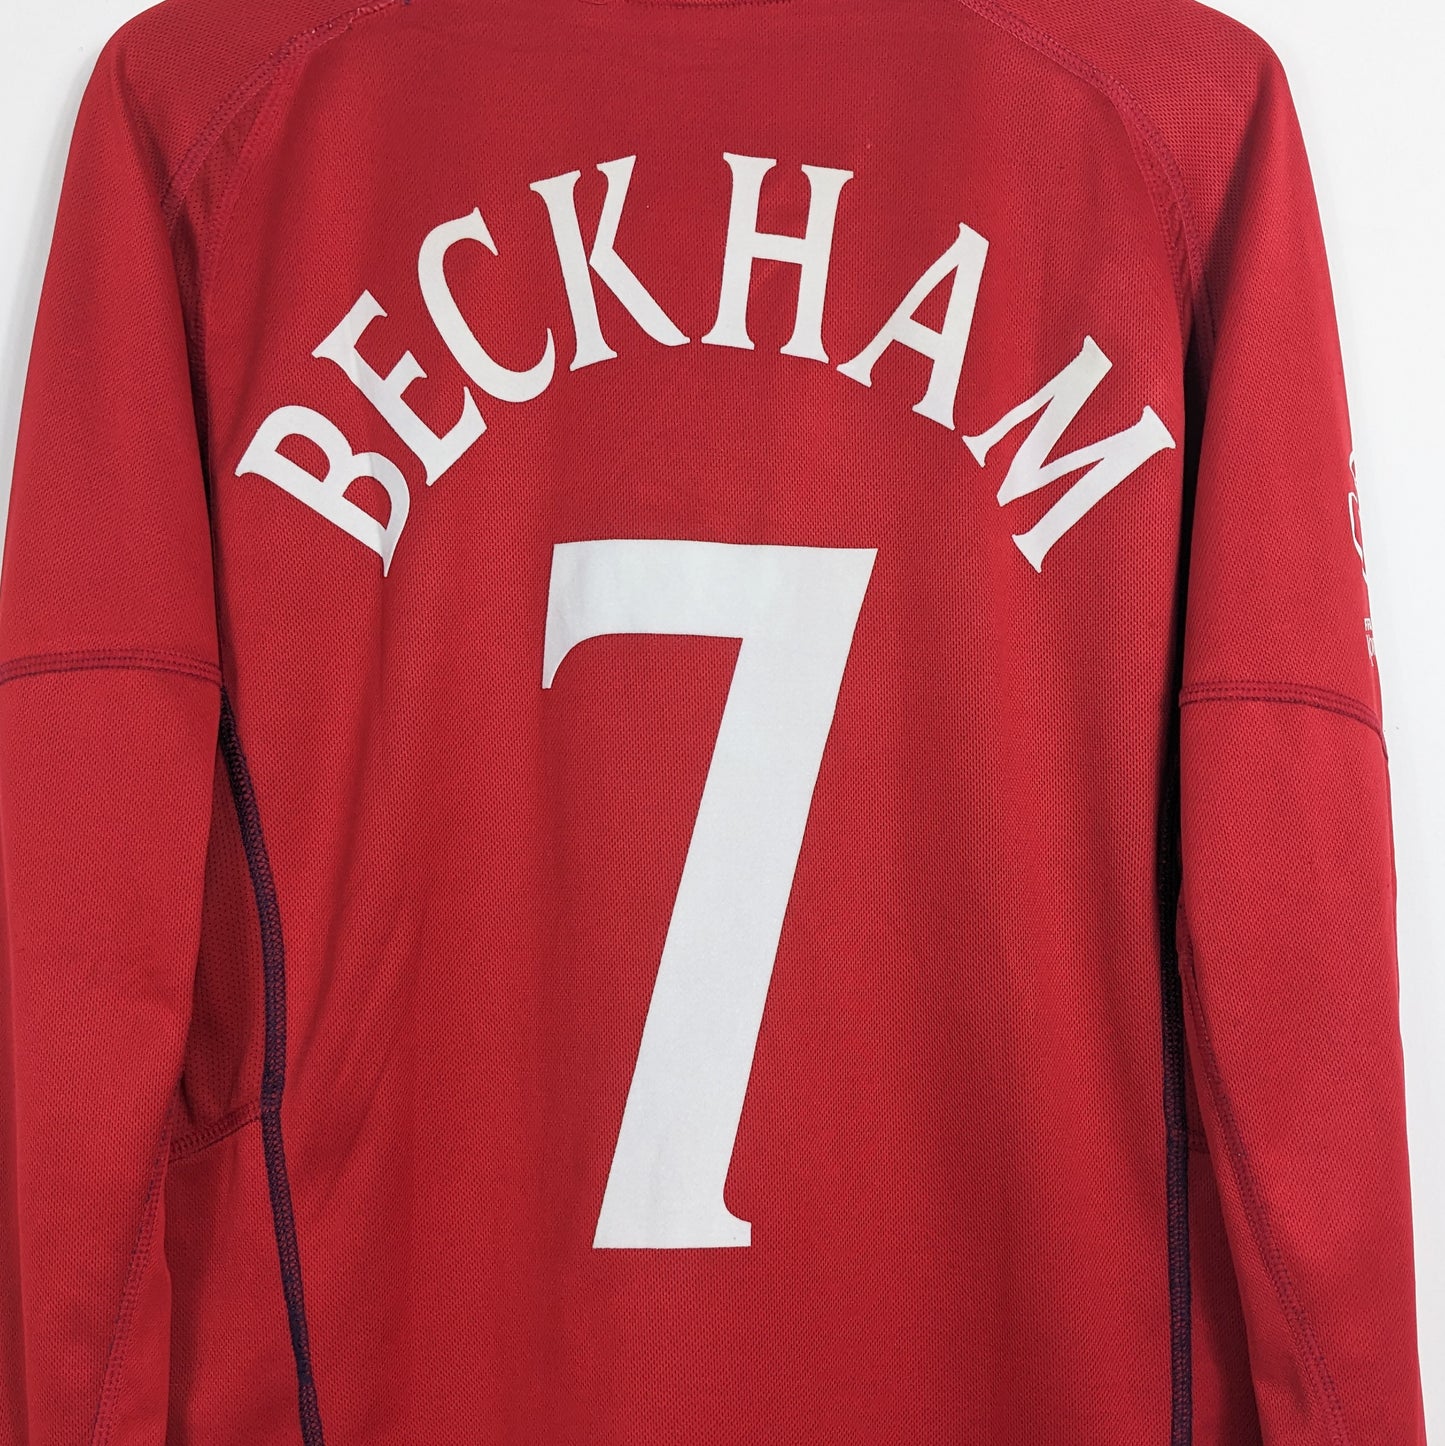 Authentic England 2002 Away - Beckham #7 Size M (Long Sleeve) (World Cup)